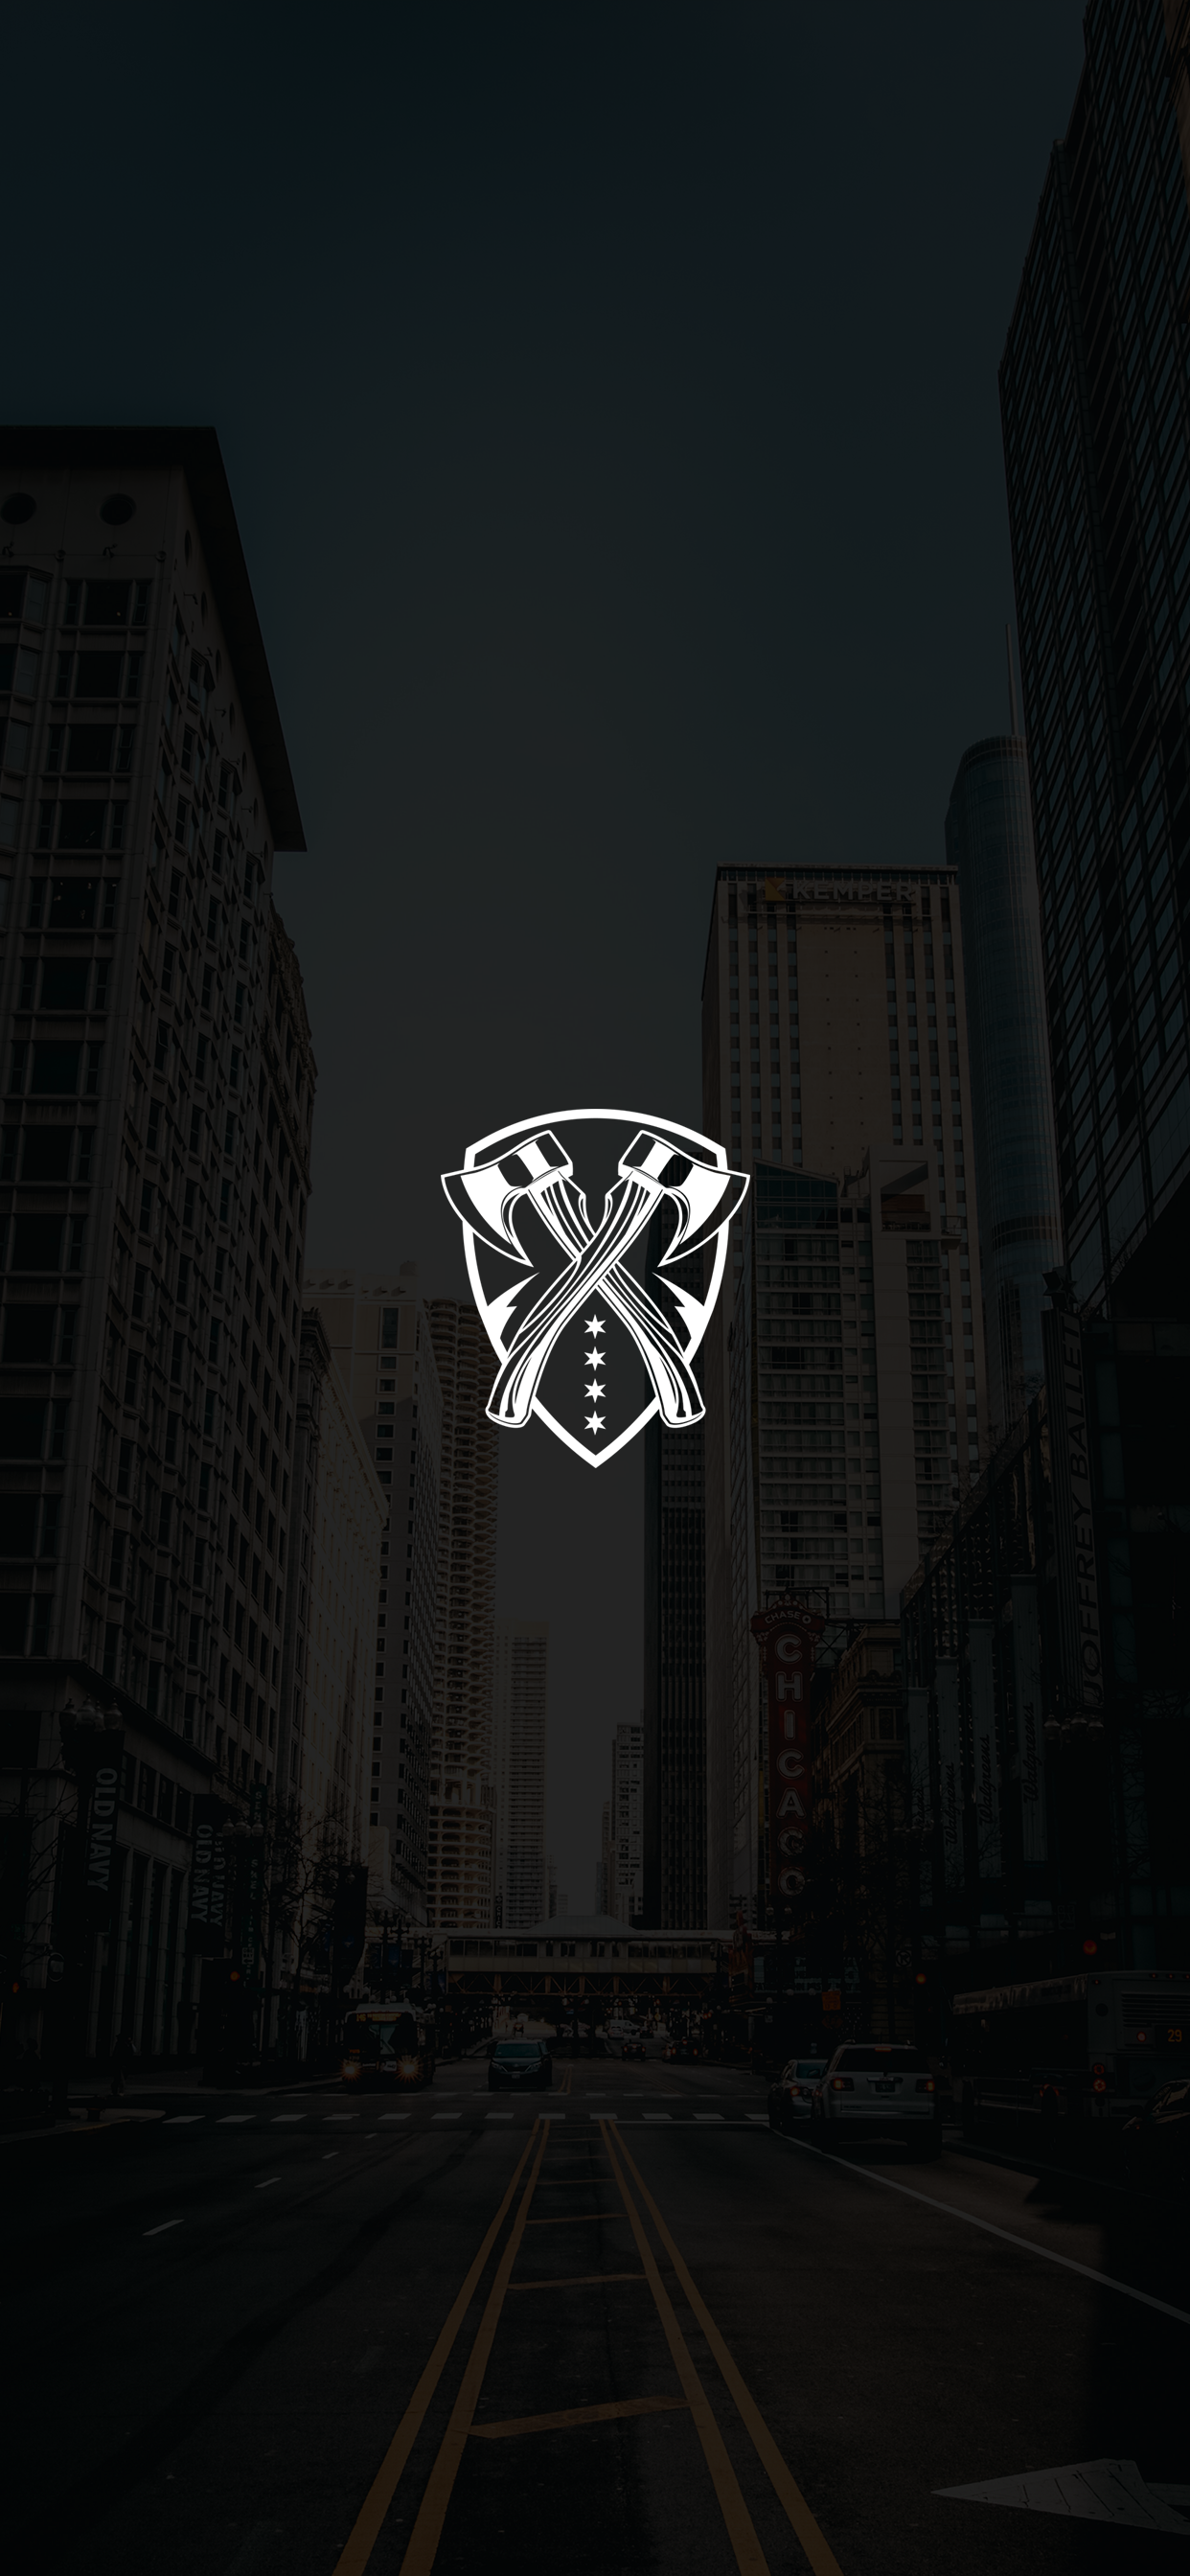 Made some minimalist Chicago Huntsmen phone wallpaper. High res in the comment. Let me know which team you'd like me to next